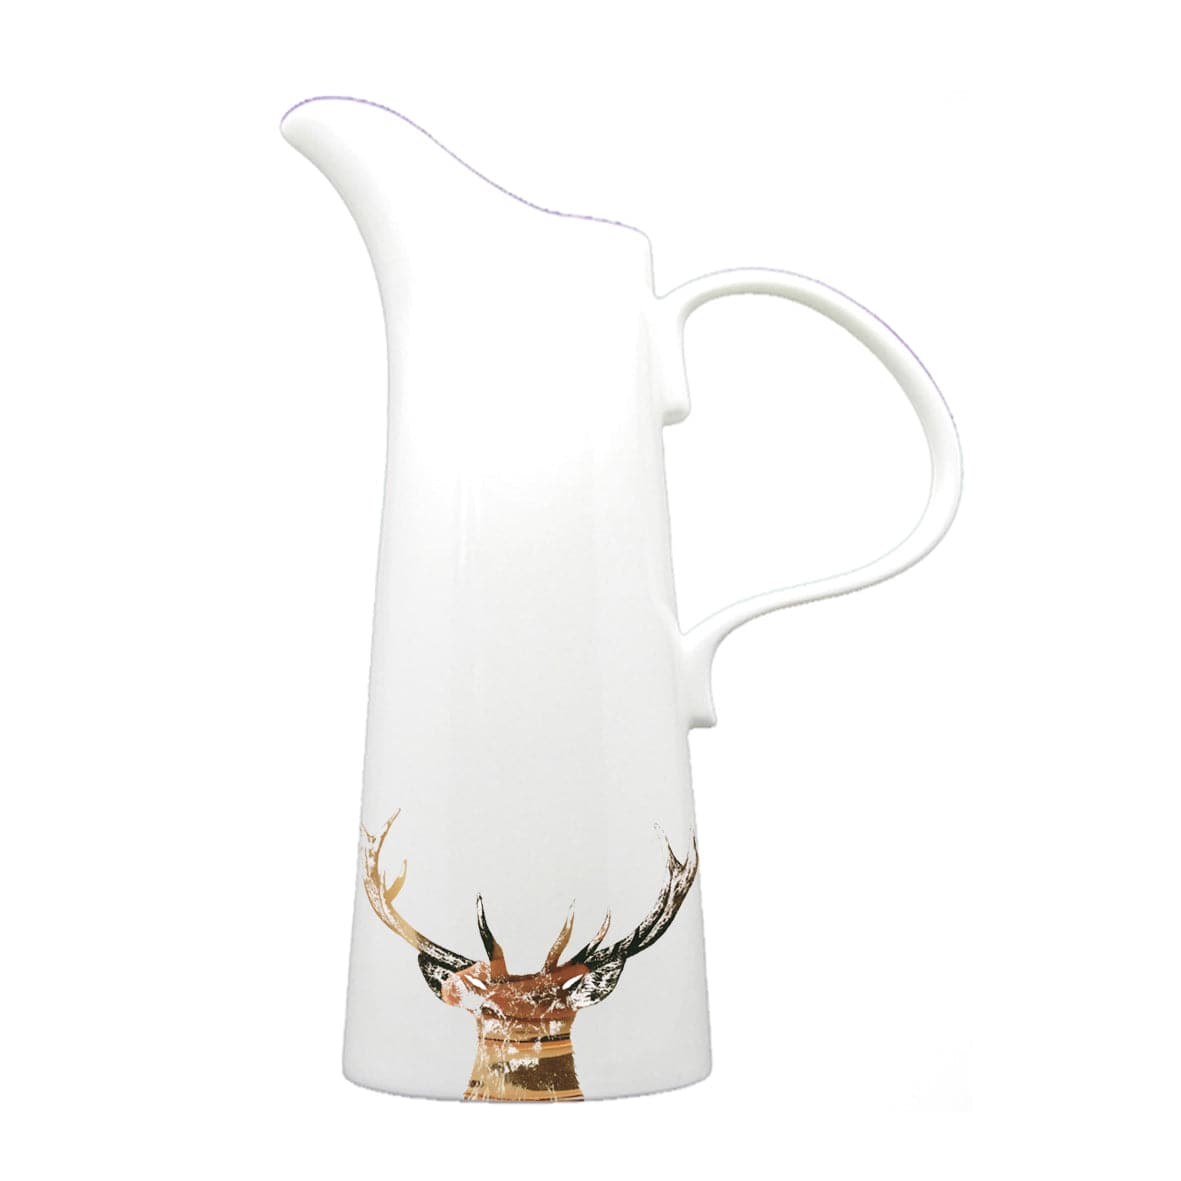 Stag Jug - Extra Large for sale - Woodcock and Cavendish